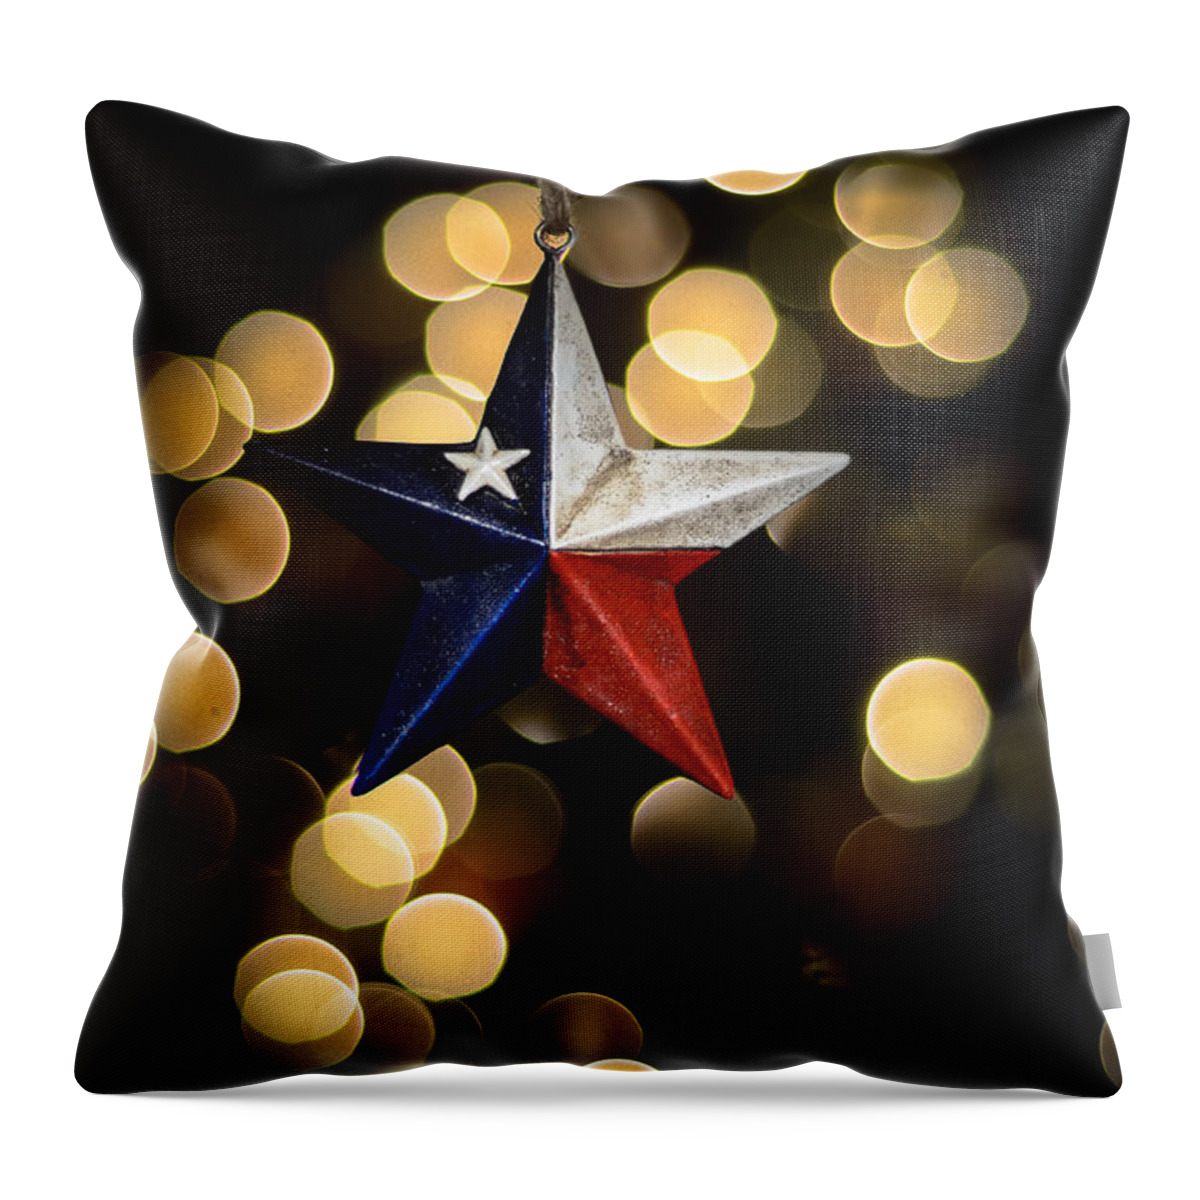 Merry Christmas Texas Throw Pillow featuring the photograph Merry Christmas Texas by Kelly Wade